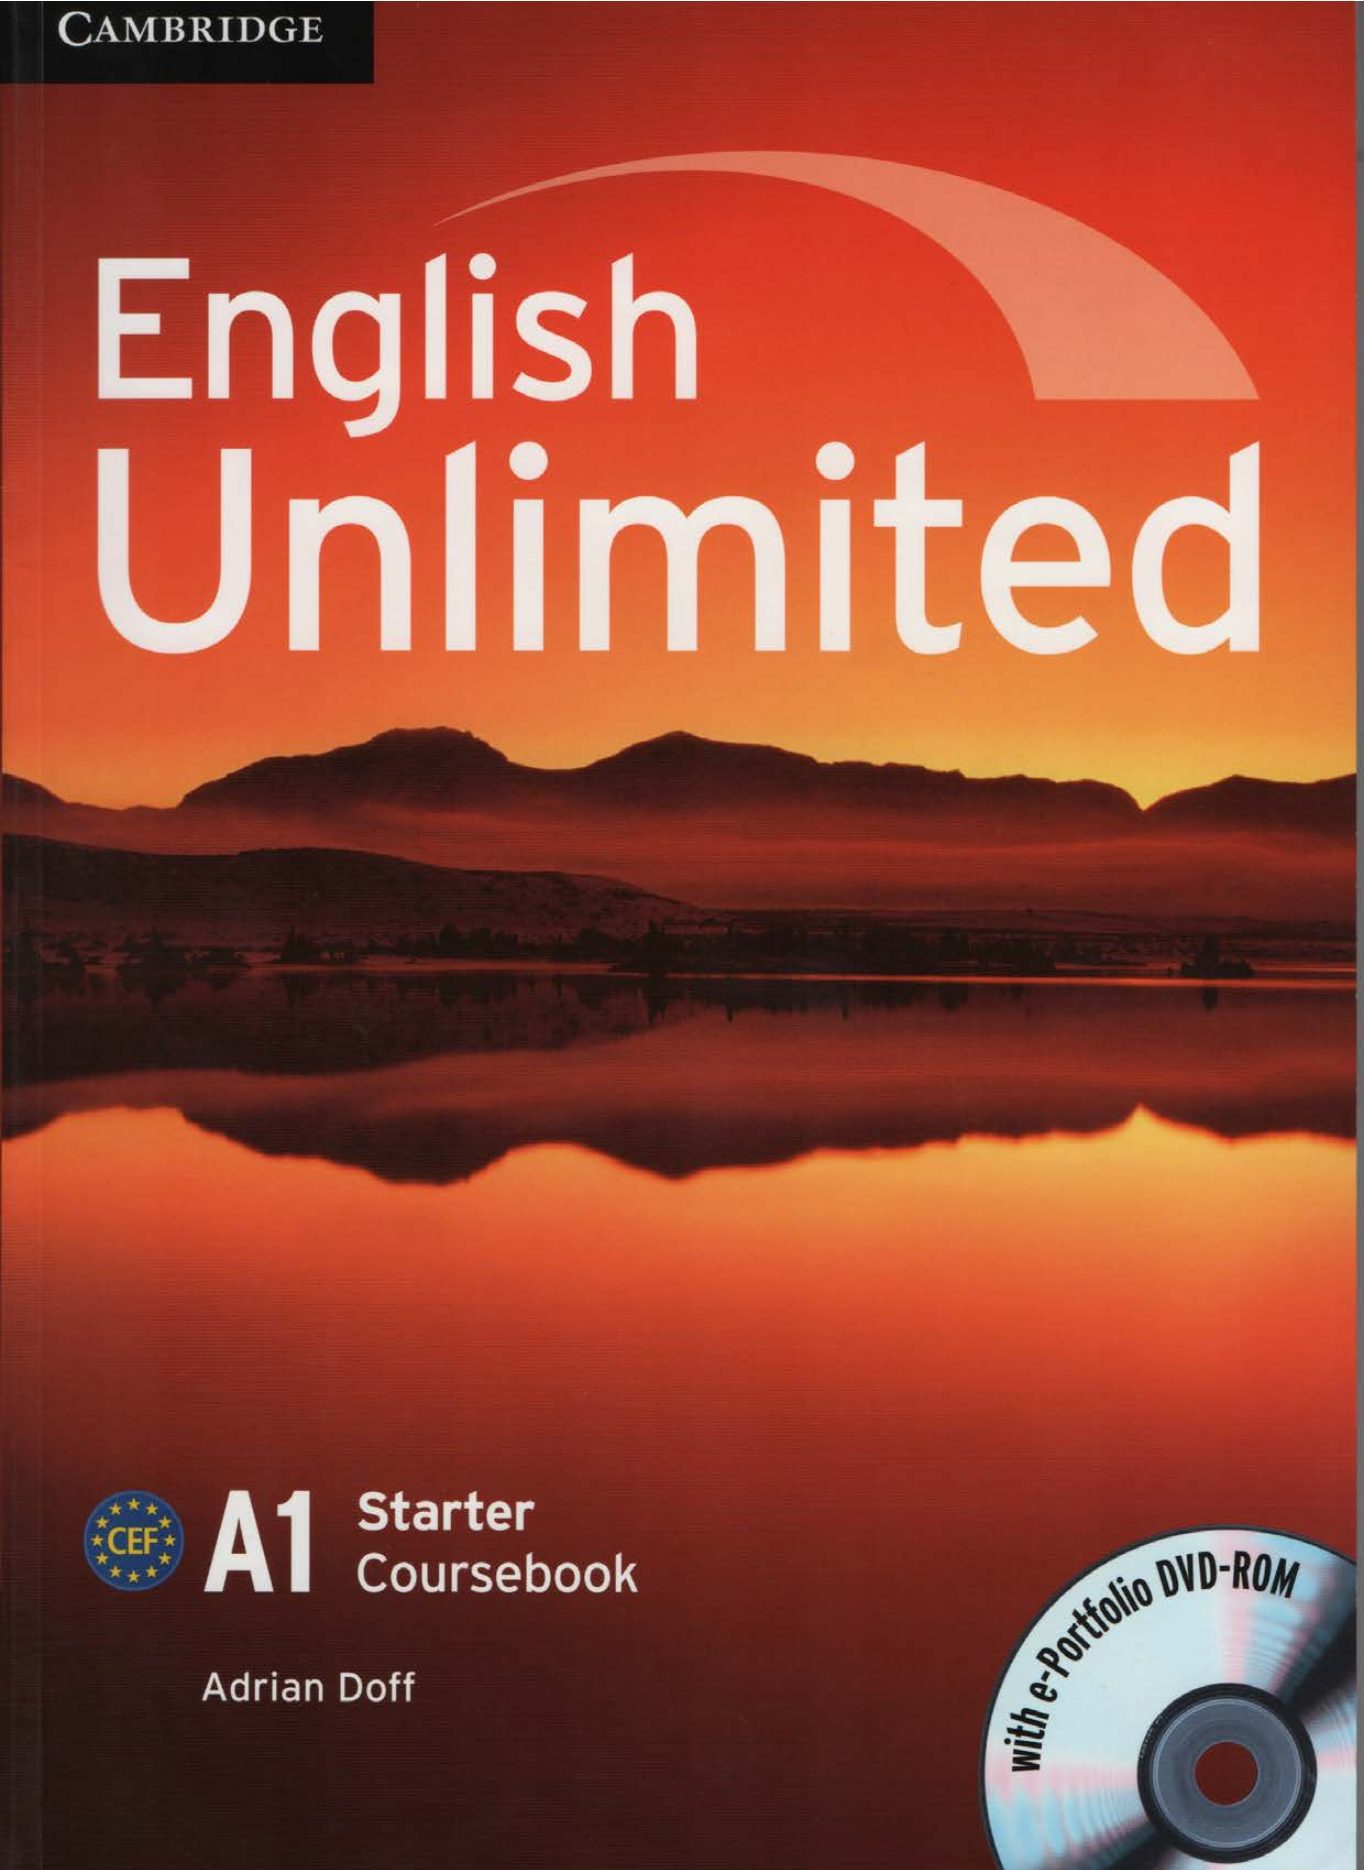 Rich Results on Google's SERP when searching for 'English Unlimited Starter Coursebook'